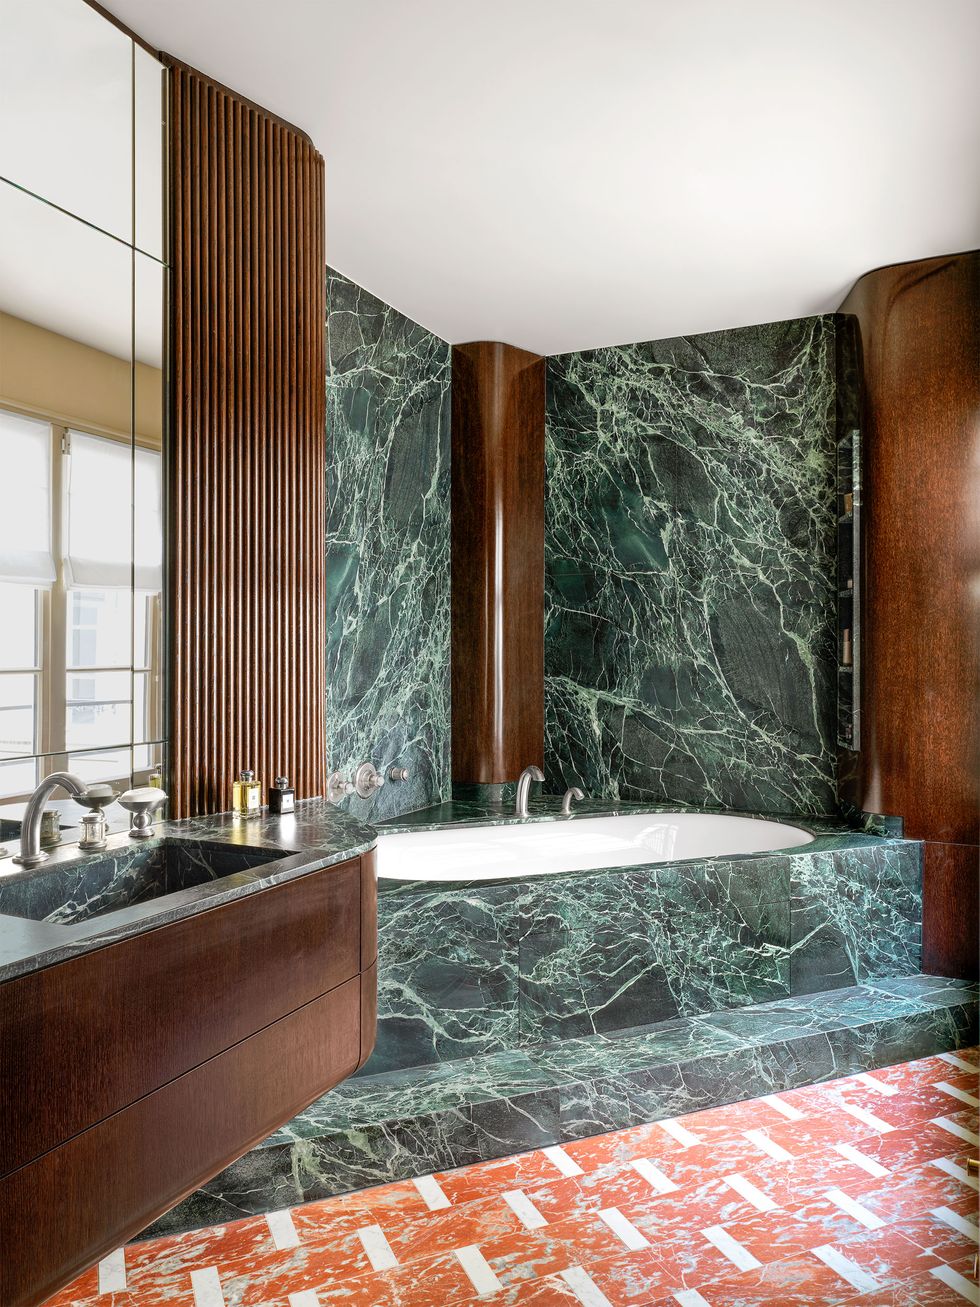 a bathroom has dark wood vanity with a sink at left against a mirrored wall, a bathtub encased in dark green marble with dark wood accented walls, the floor is red and white marble